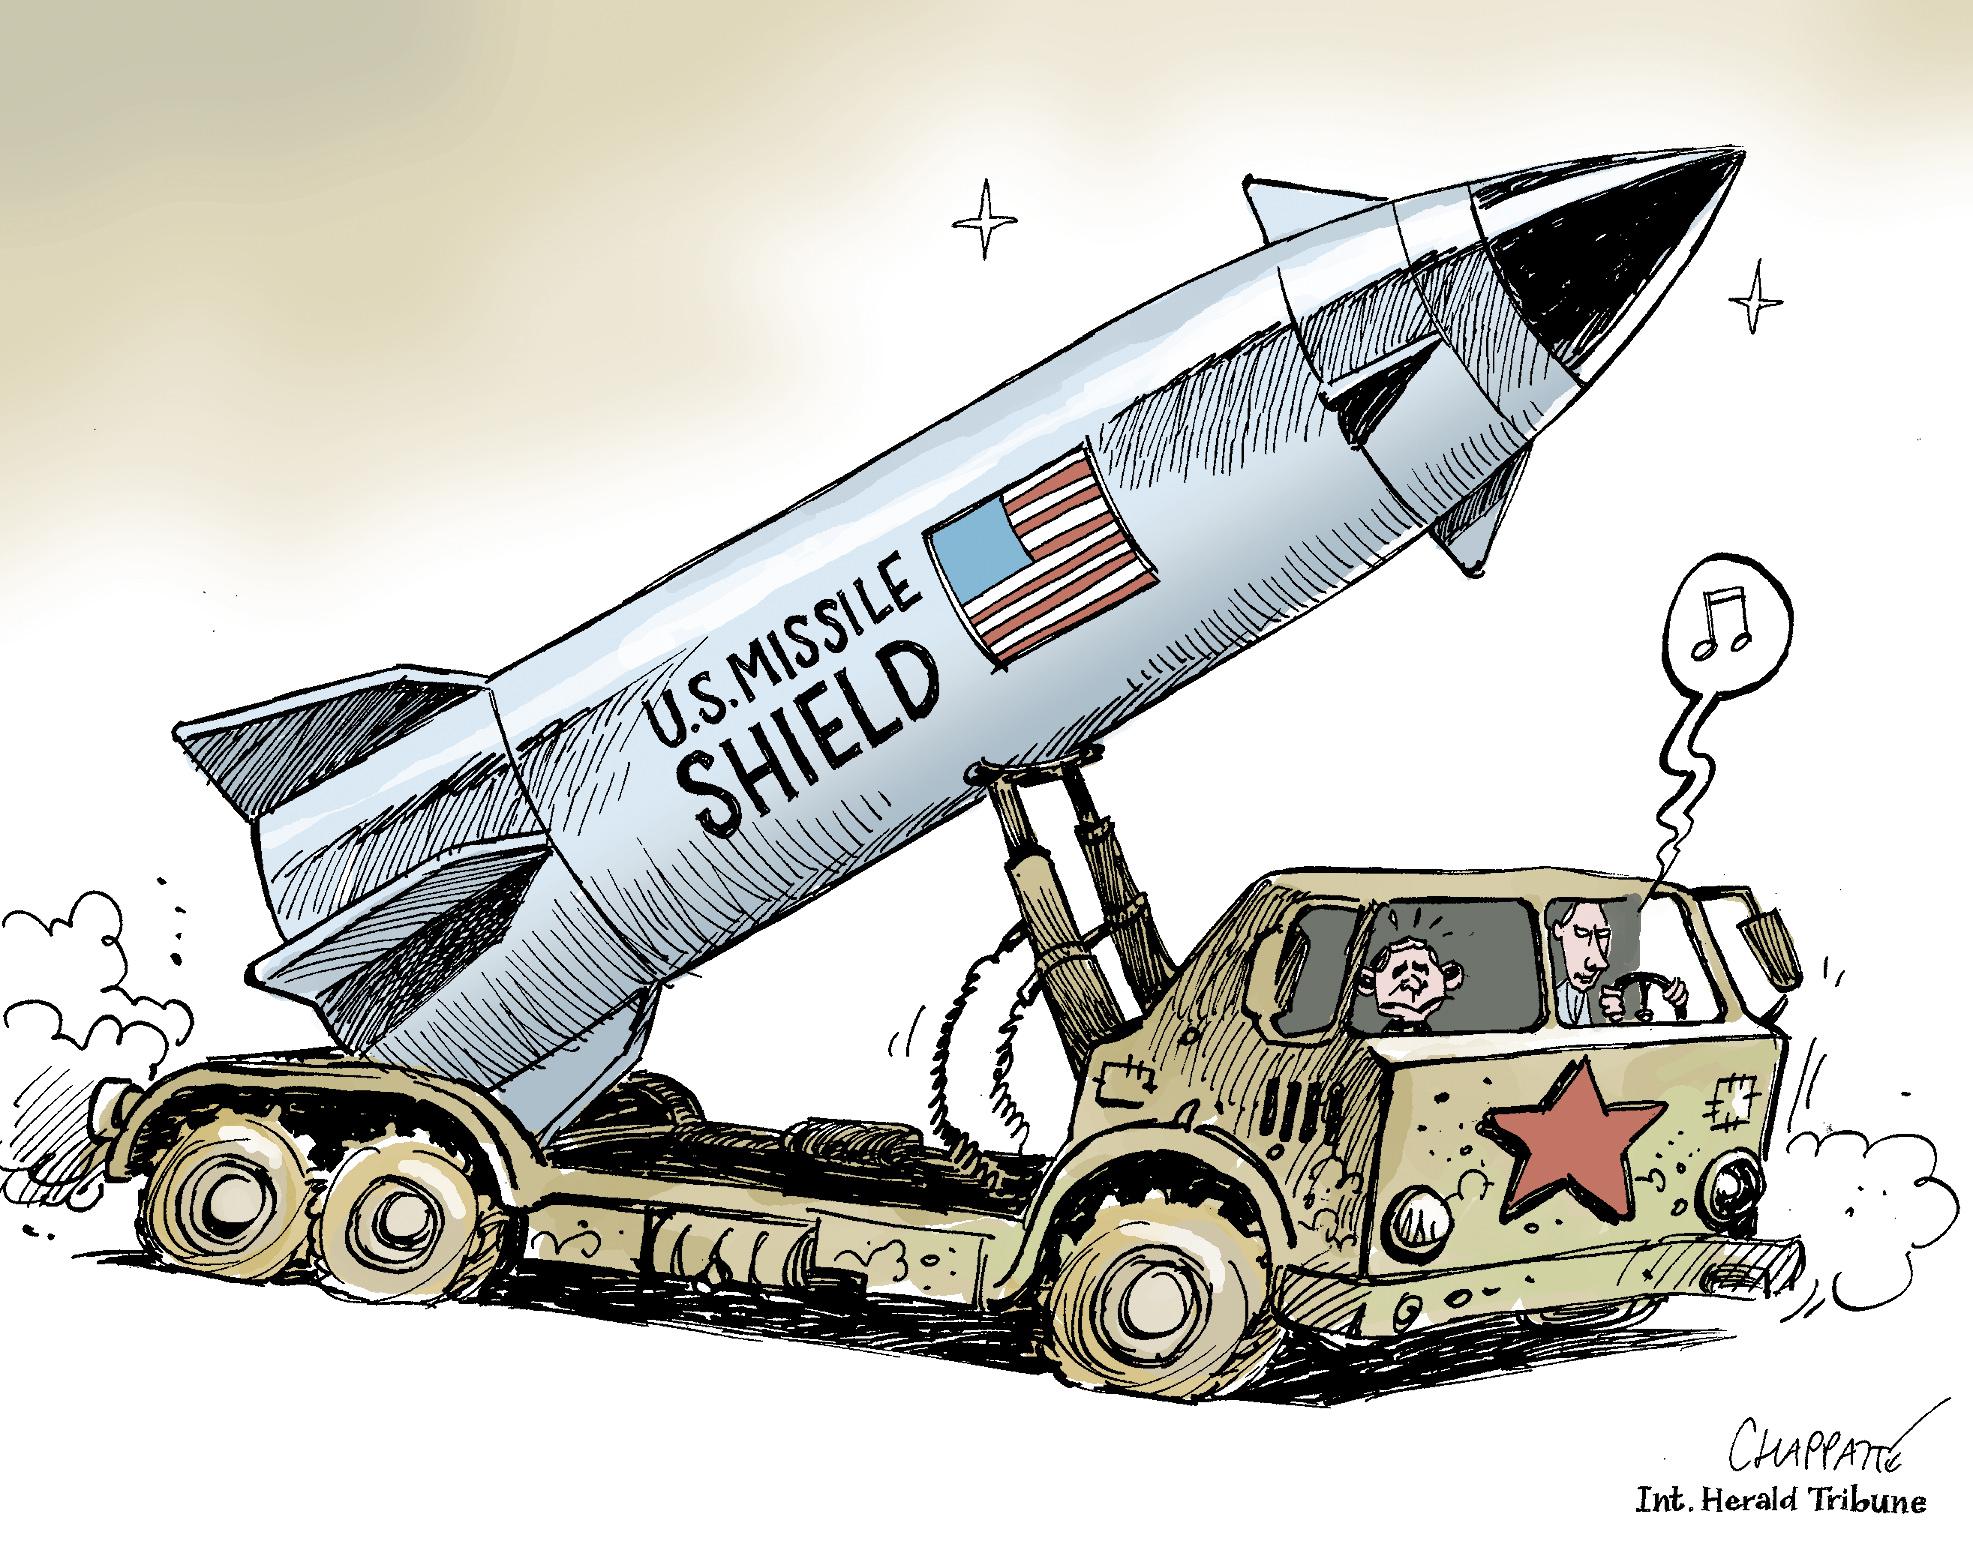 US-Russian Missile Shield?